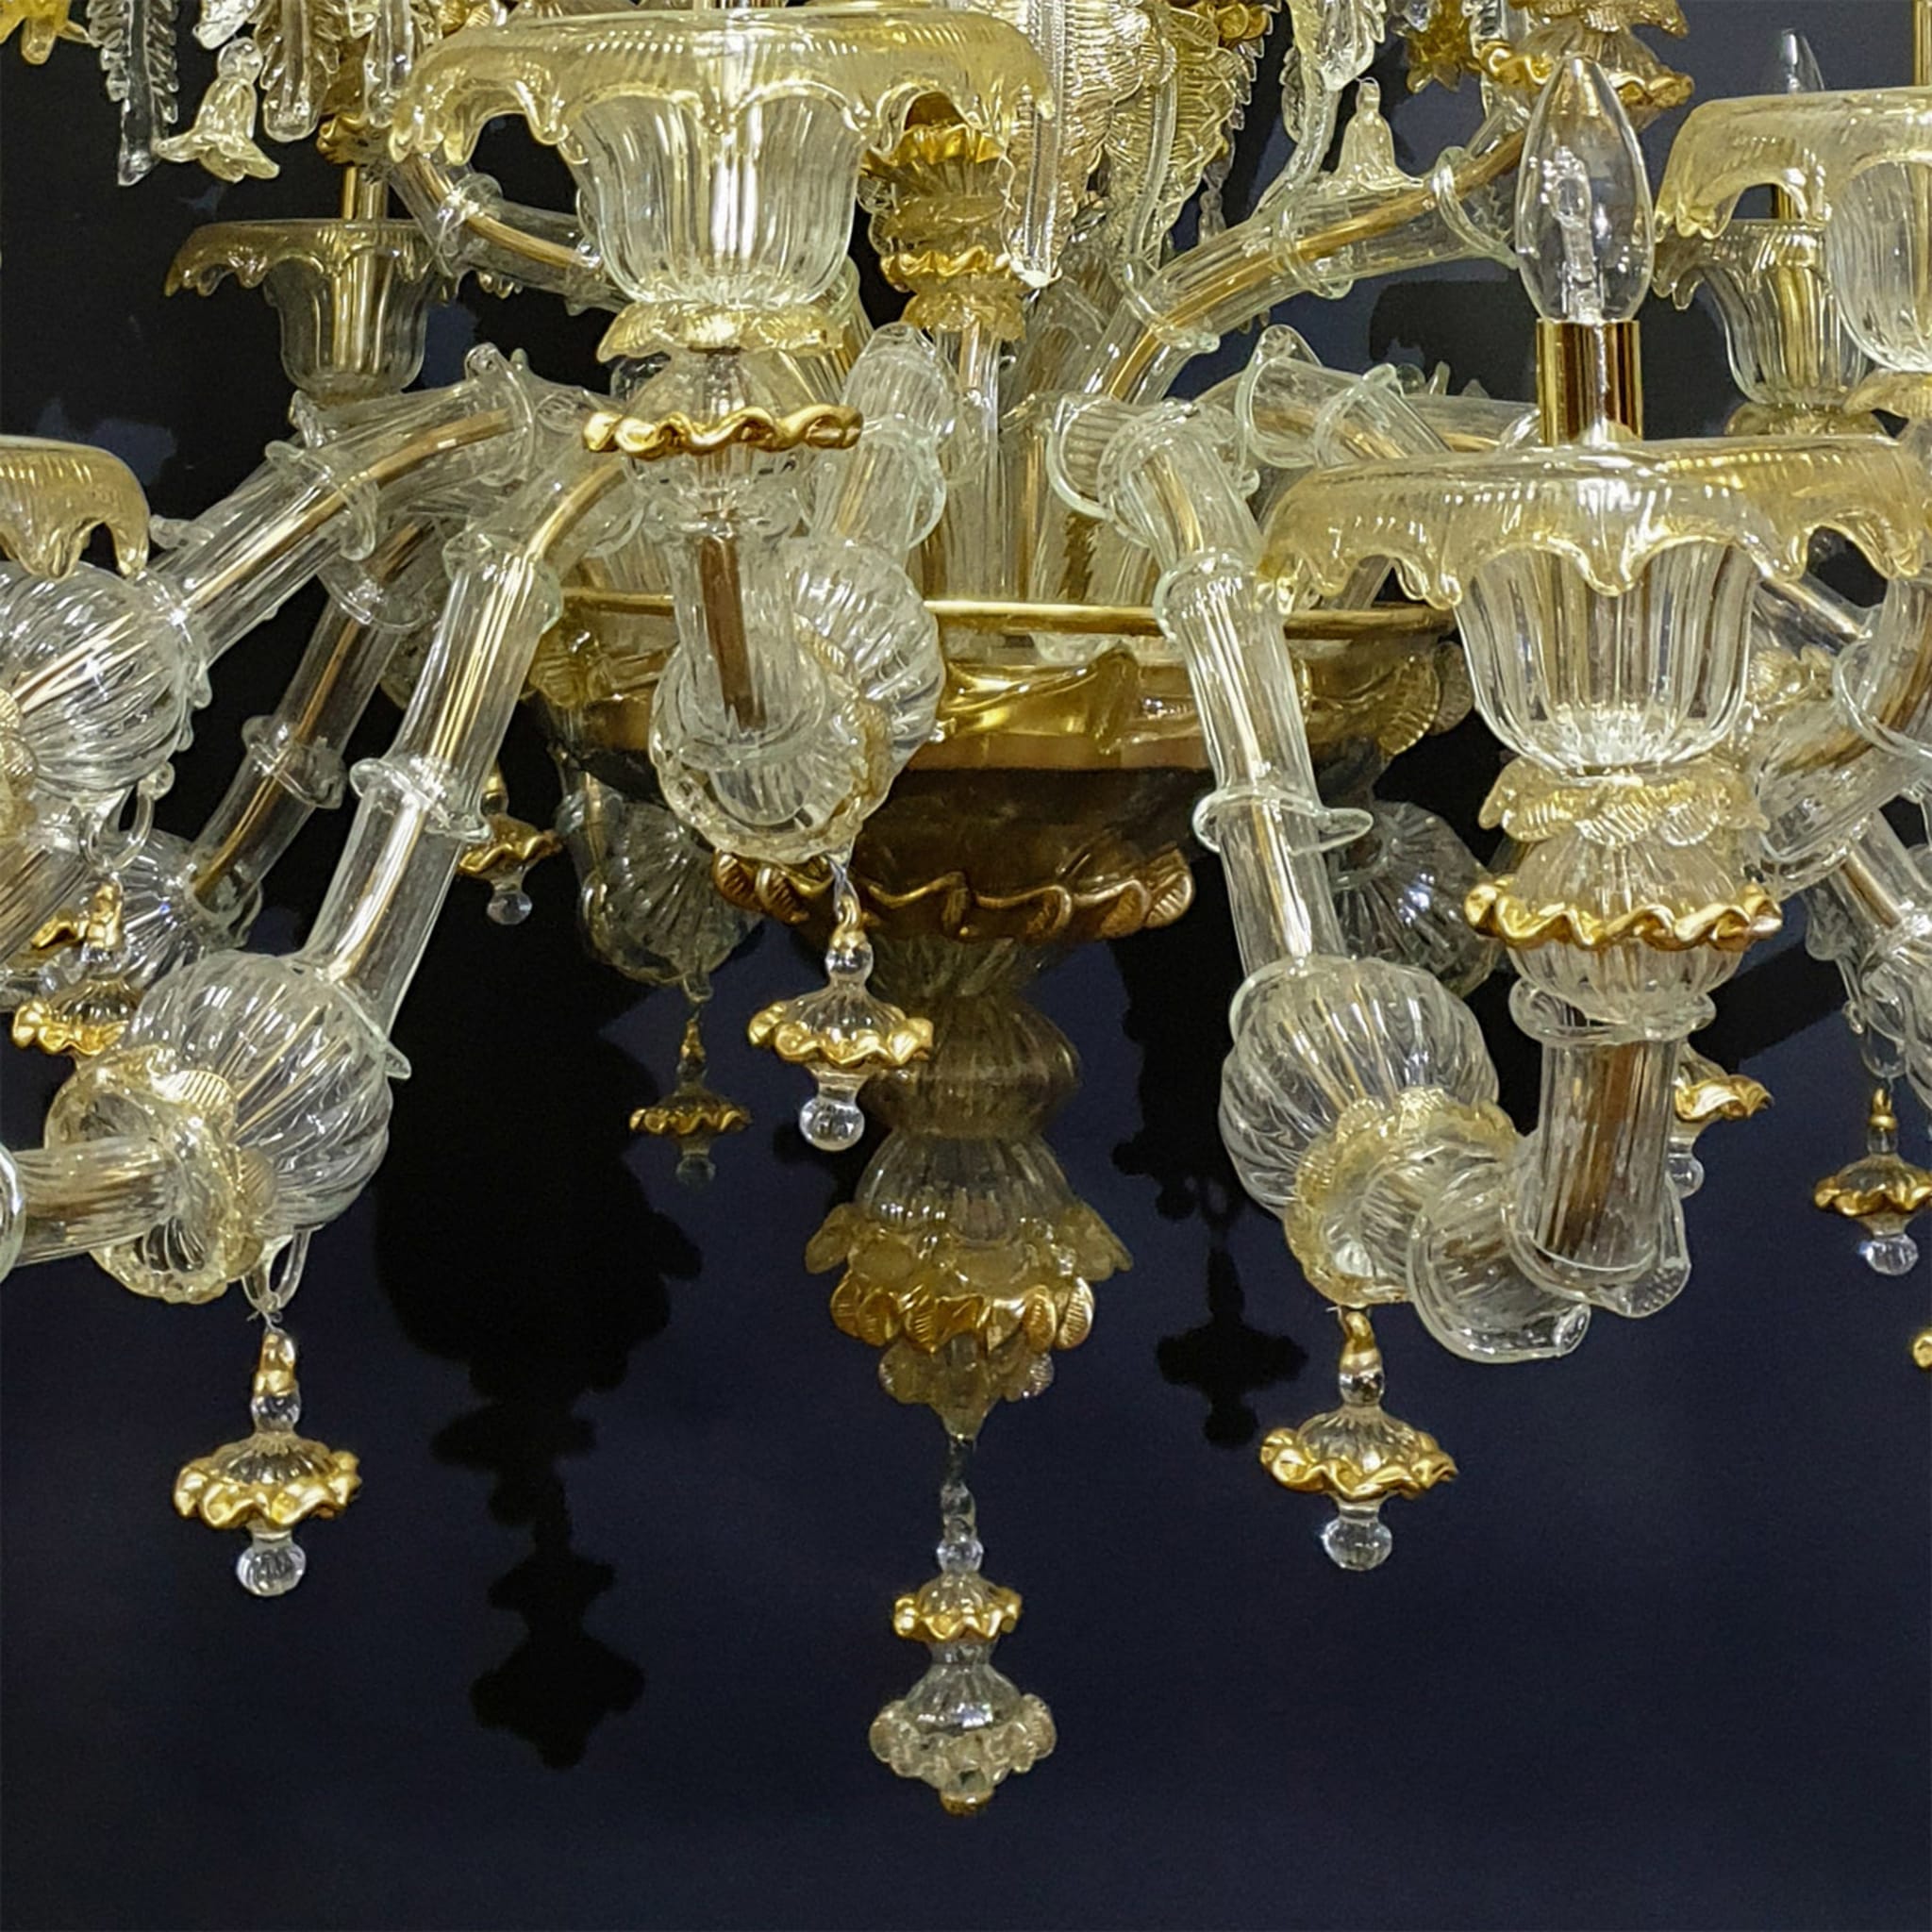 Rezzonico-style Gold and Crystal Chandelier #3 - Alternative view 4